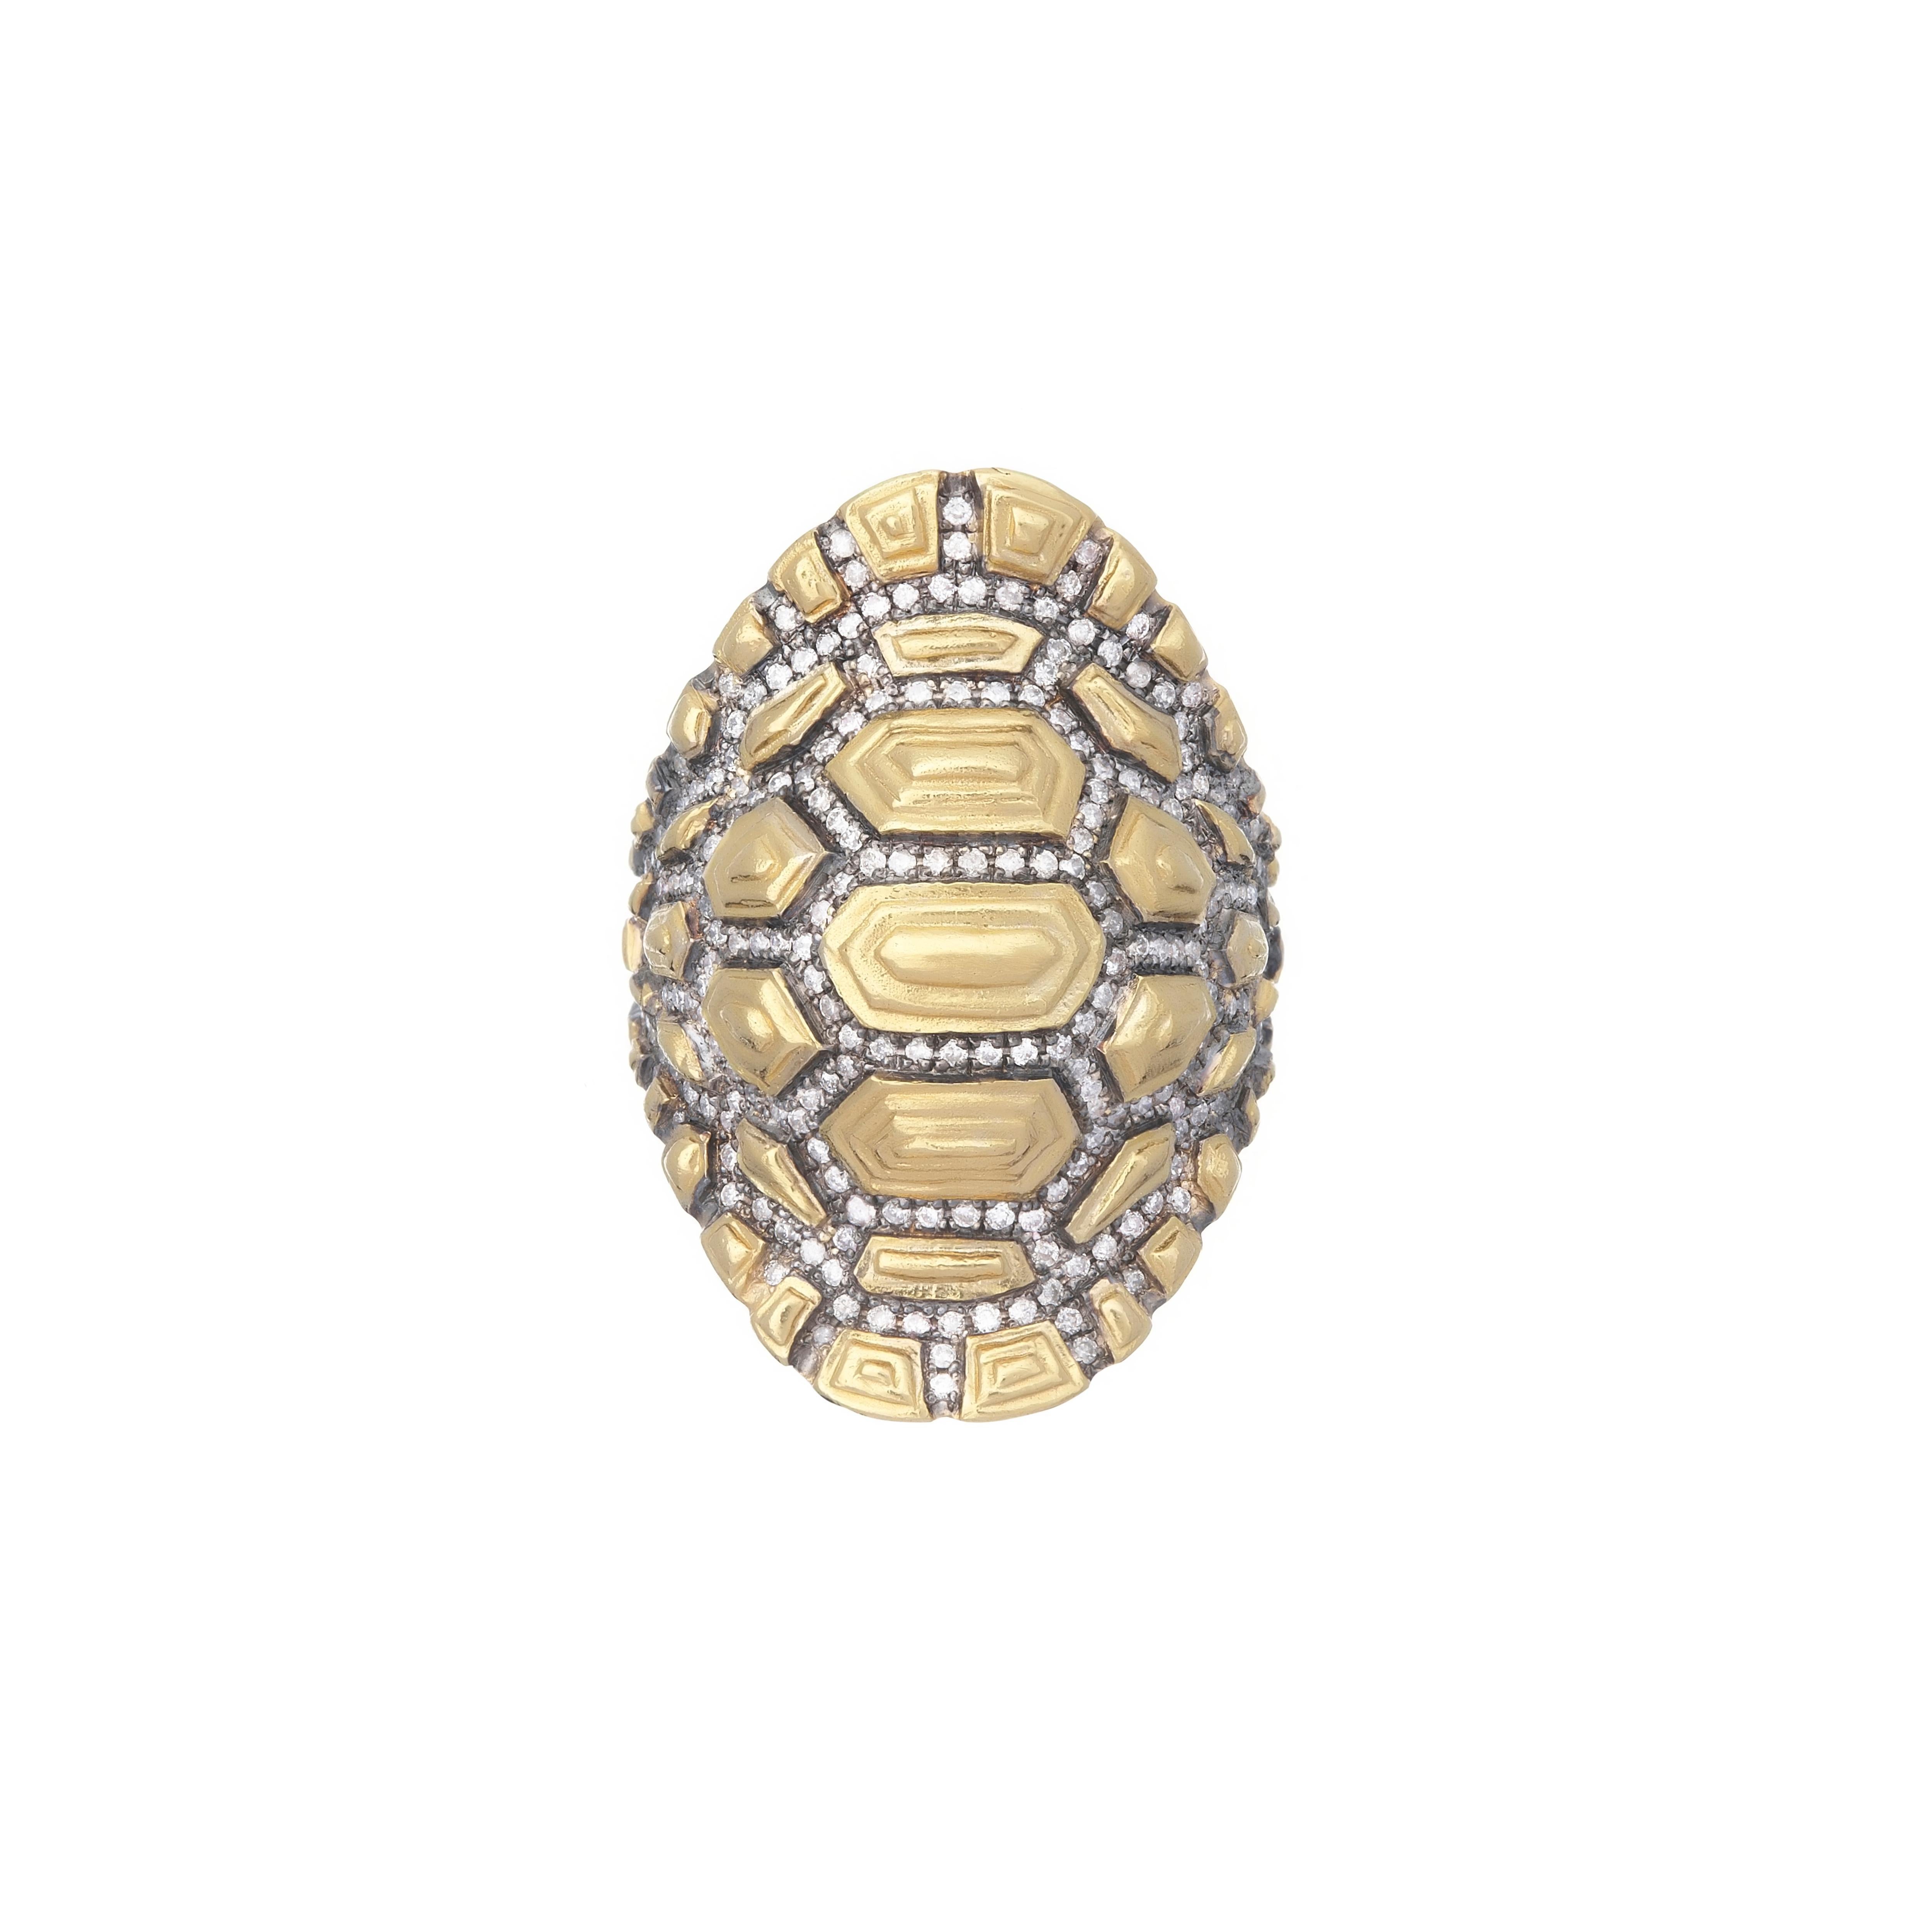 Contemporary Venyx 18 Karat Gold and Diamond Madagascar Cocktail Ring For Sale